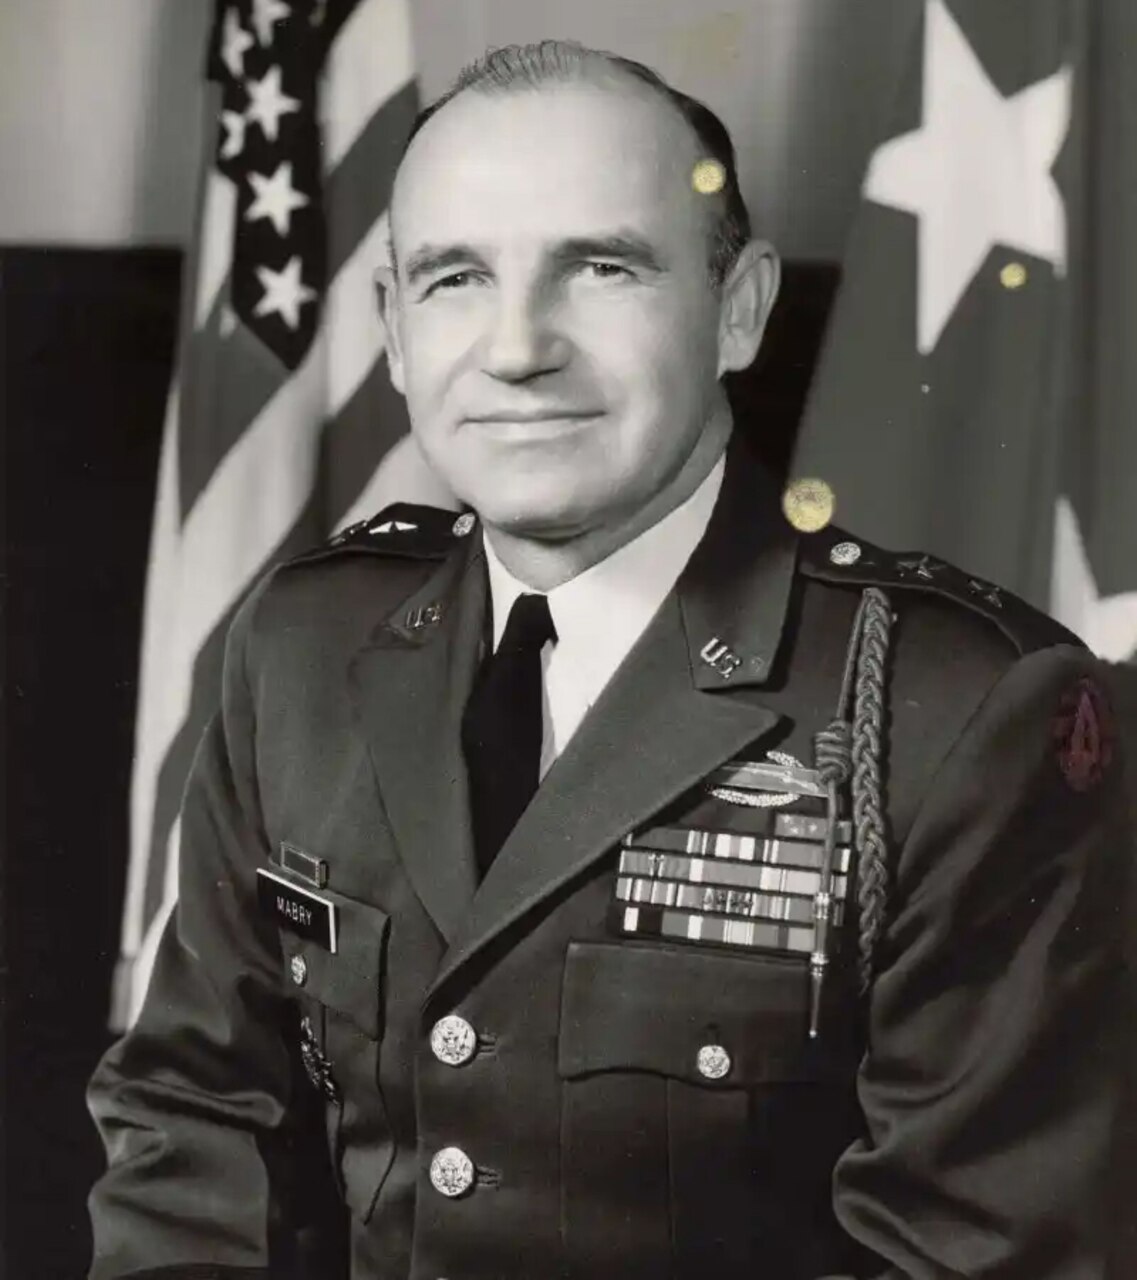 A man in dress uniform poses for a photo.